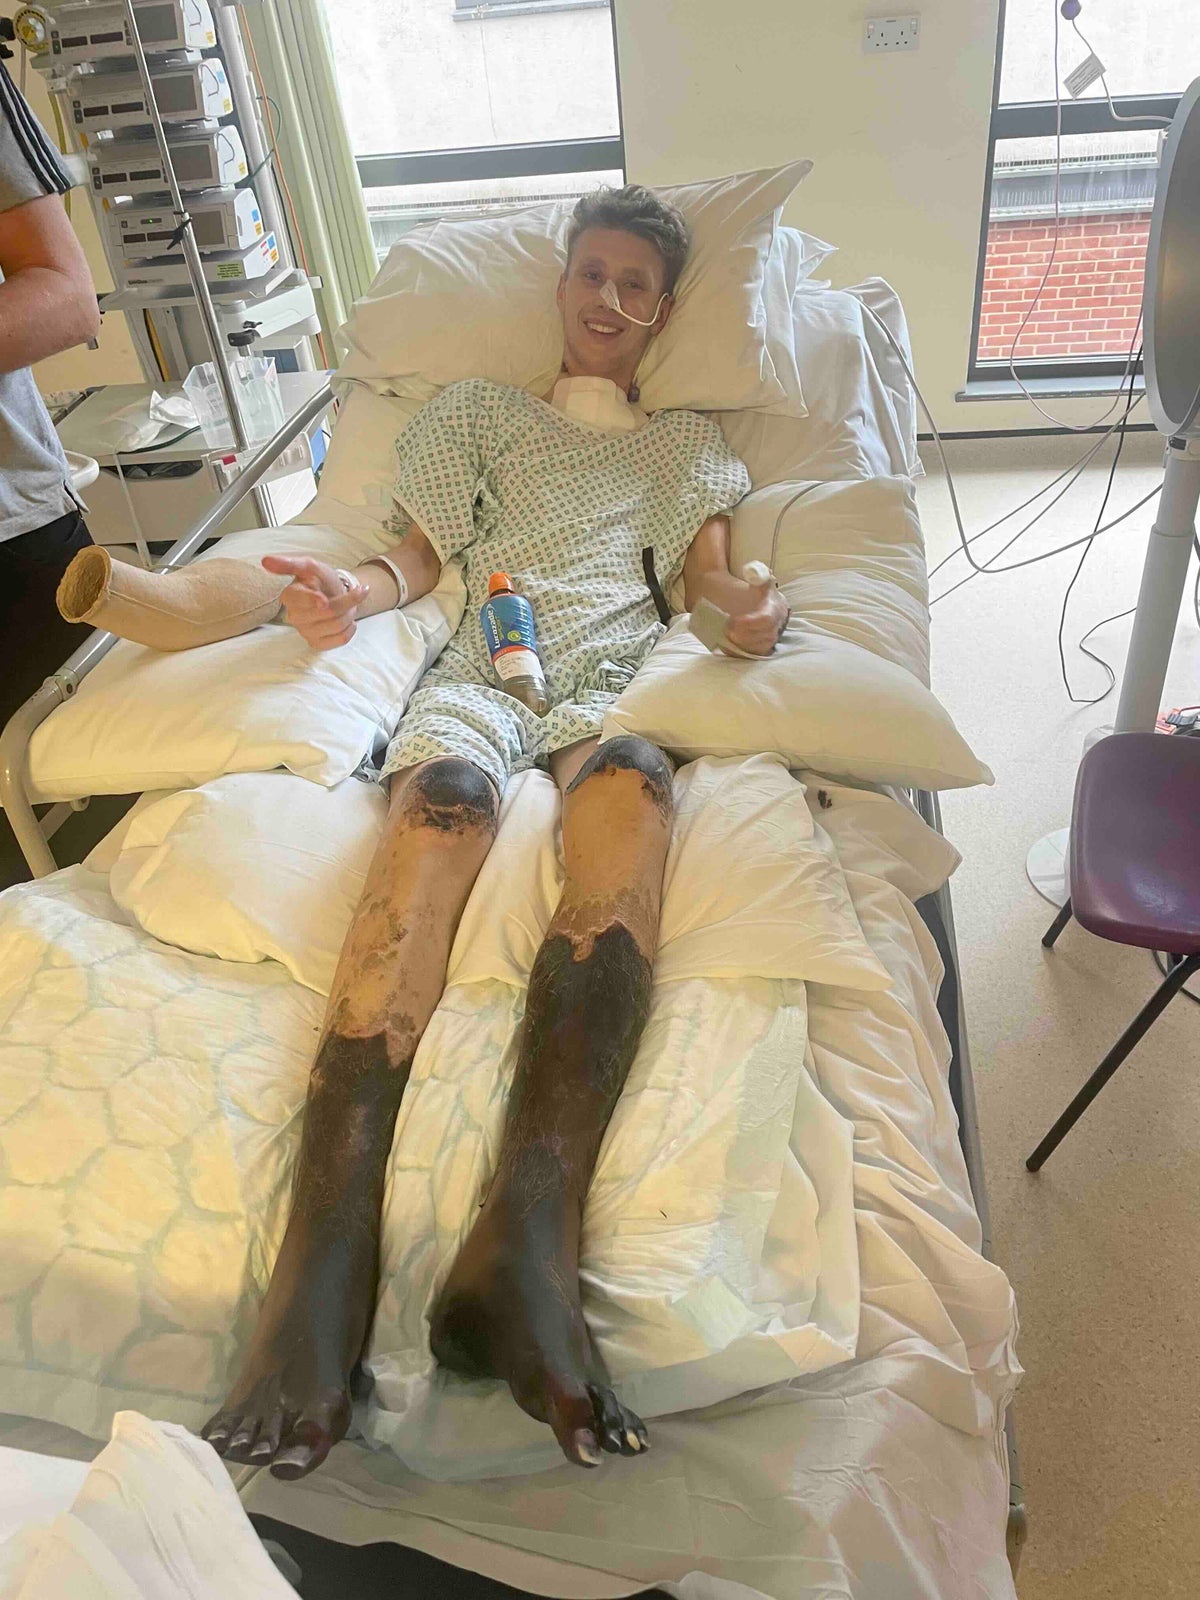 Footballer who went to hospital with flu symptoms has legs amputated days before 21st birthday